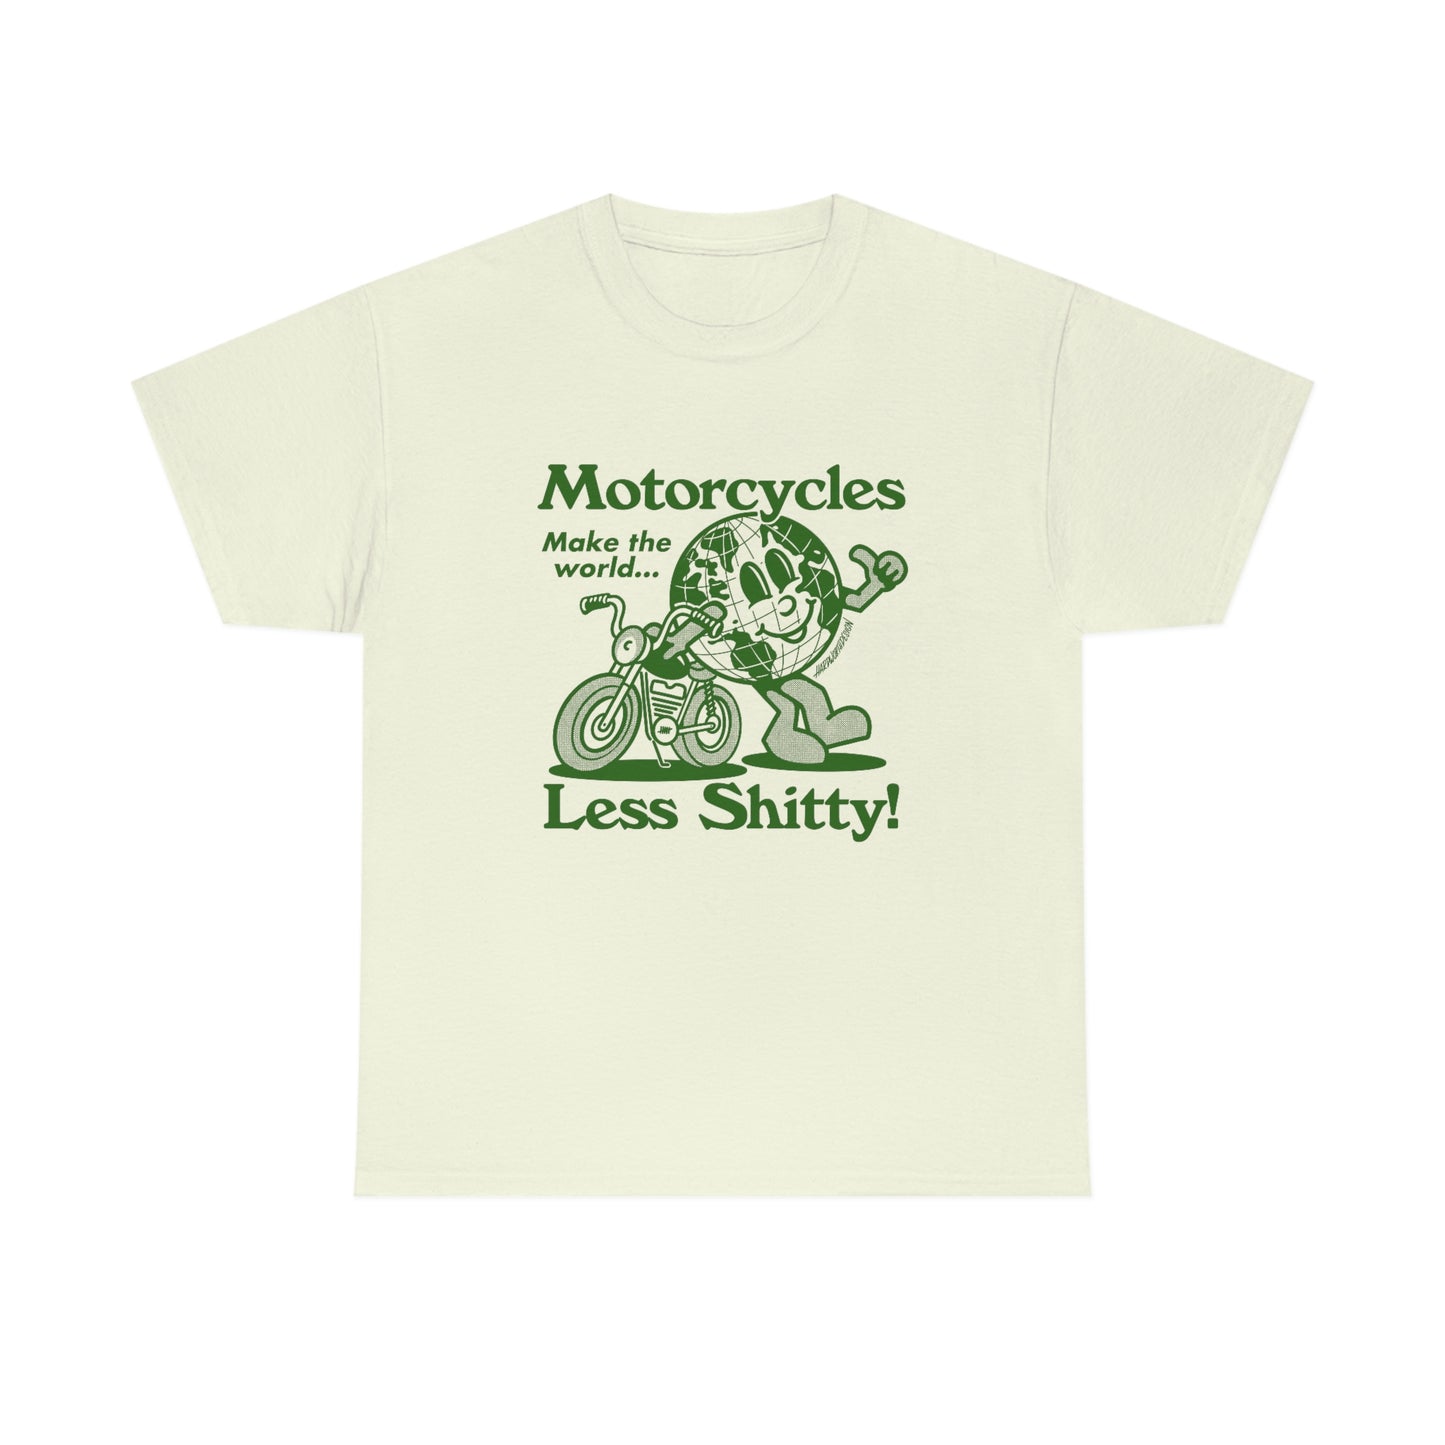 Motorcycles Make the World Less Shitty - Unisex Tee